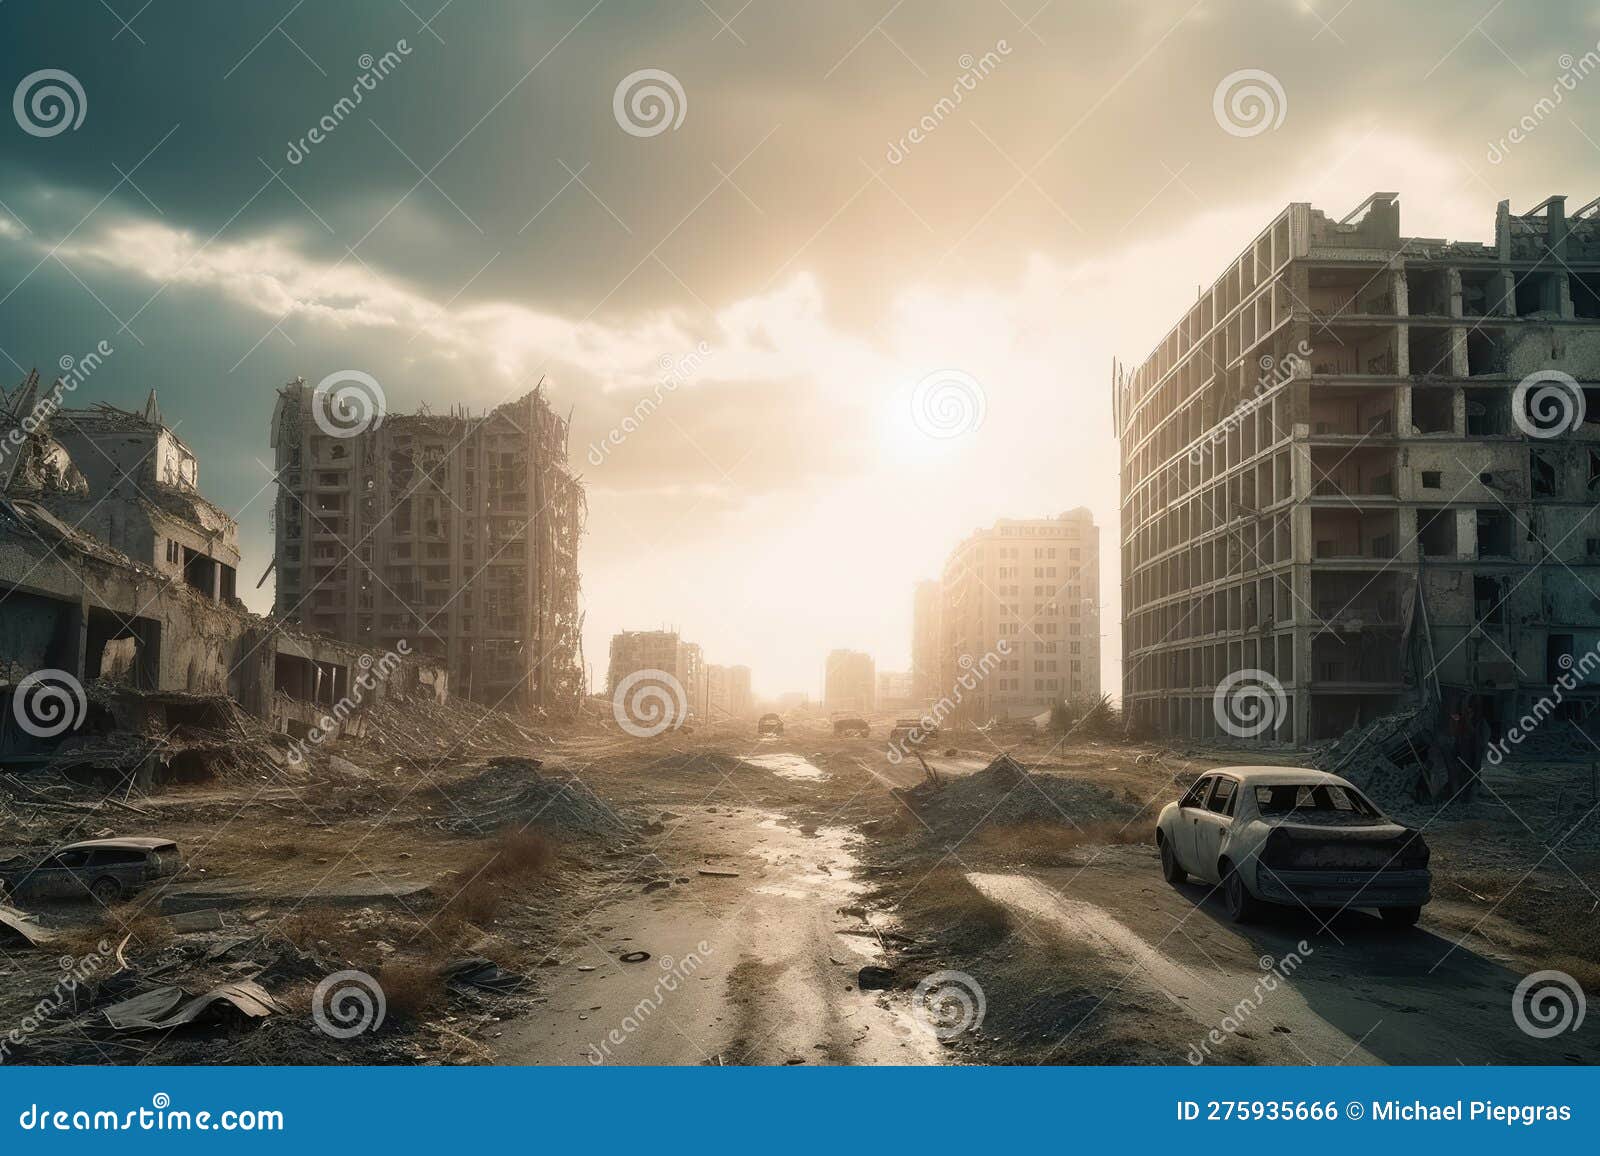 Post Apocalyptic and Destroyed Buildings in a Big City Created with ...